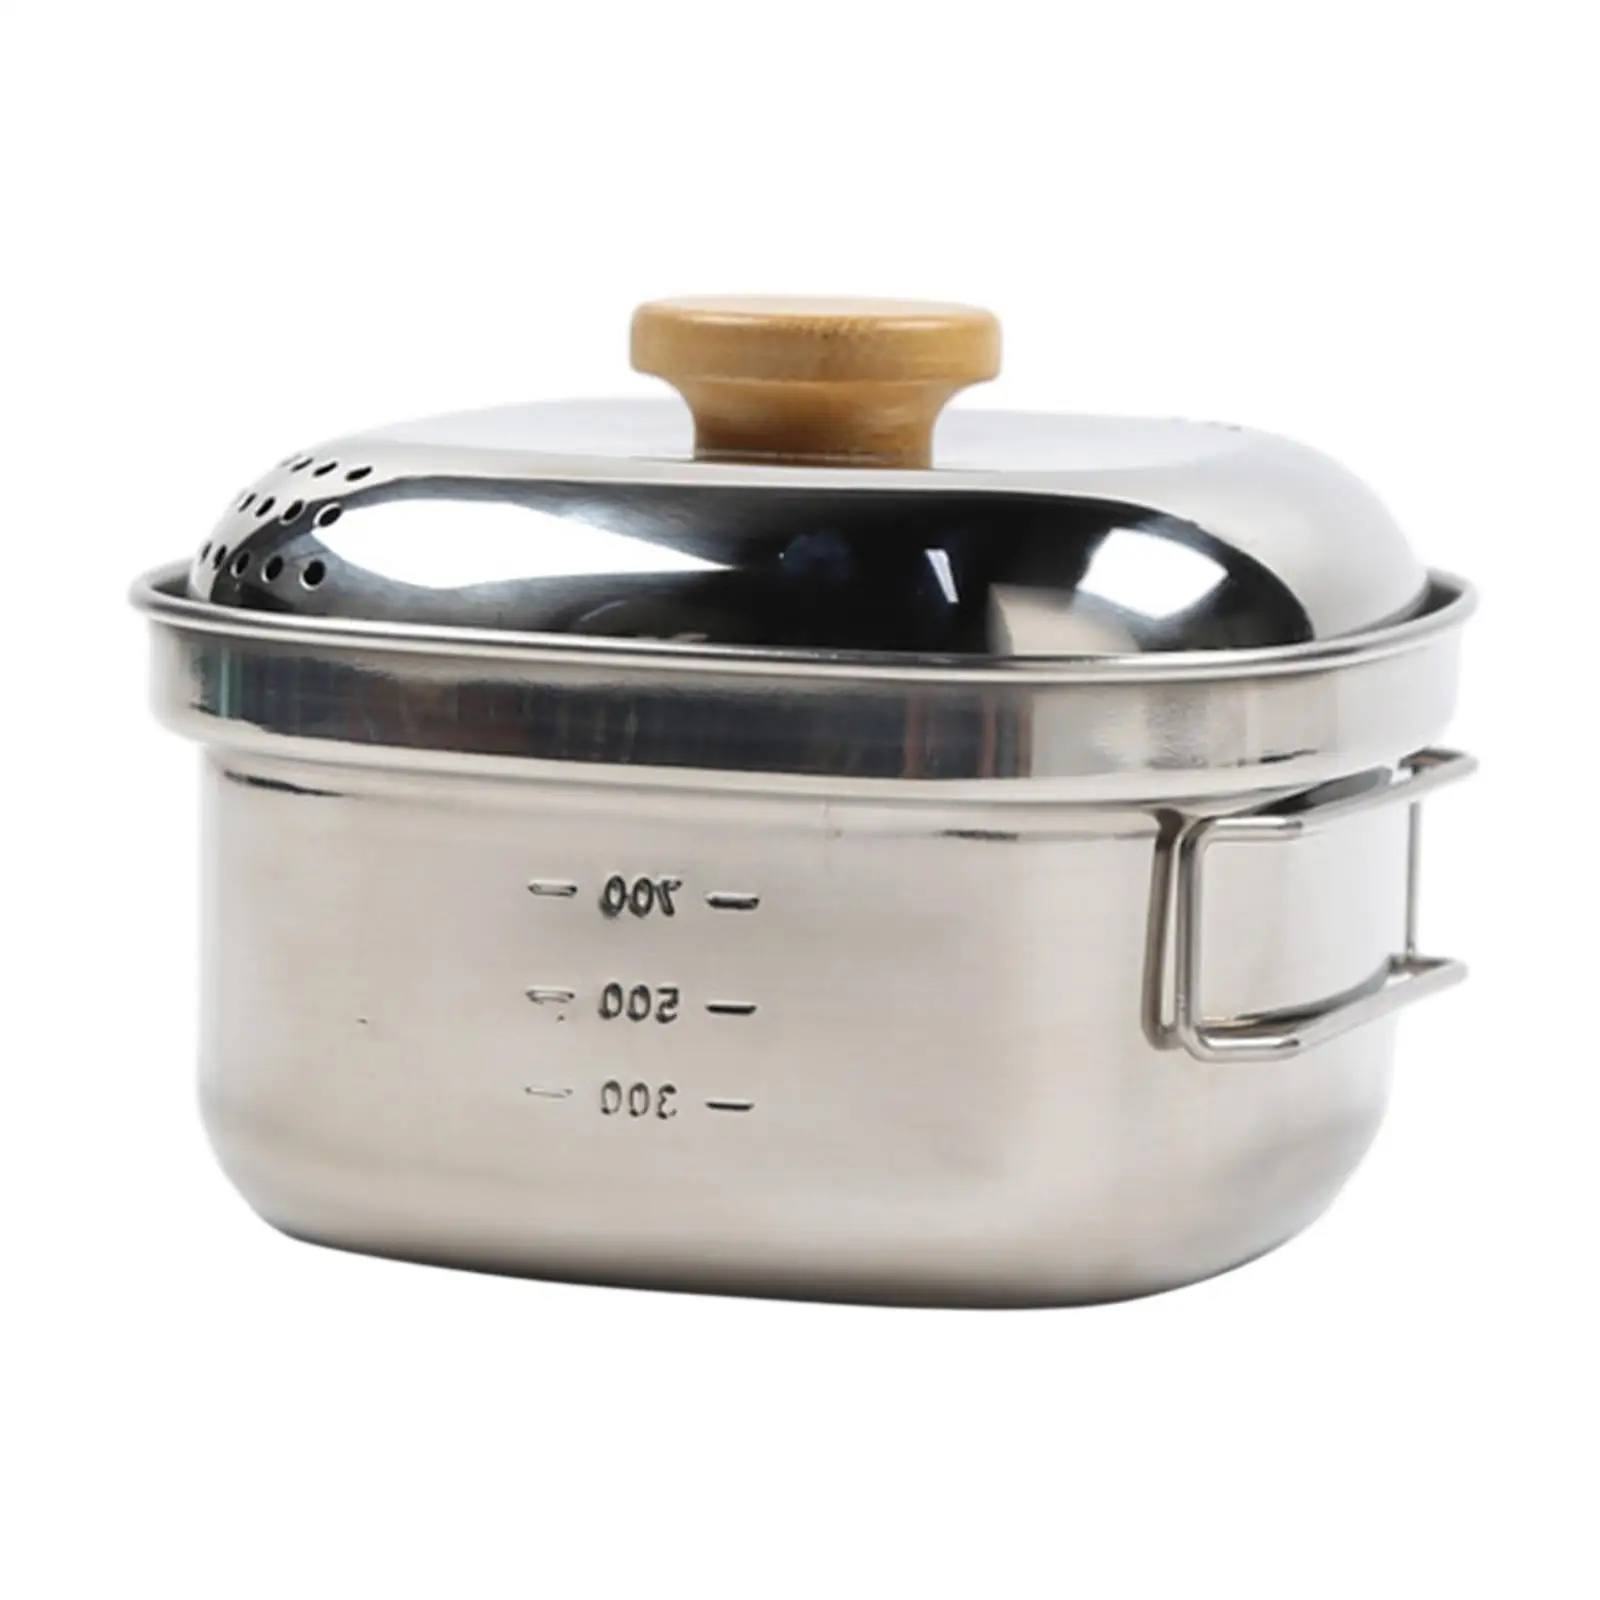 Camping Cook Pot Stainless Steel with Foldable Handle and Lid Small Cooking Pot for Traveling Picnic Home Outdoor Backpacking